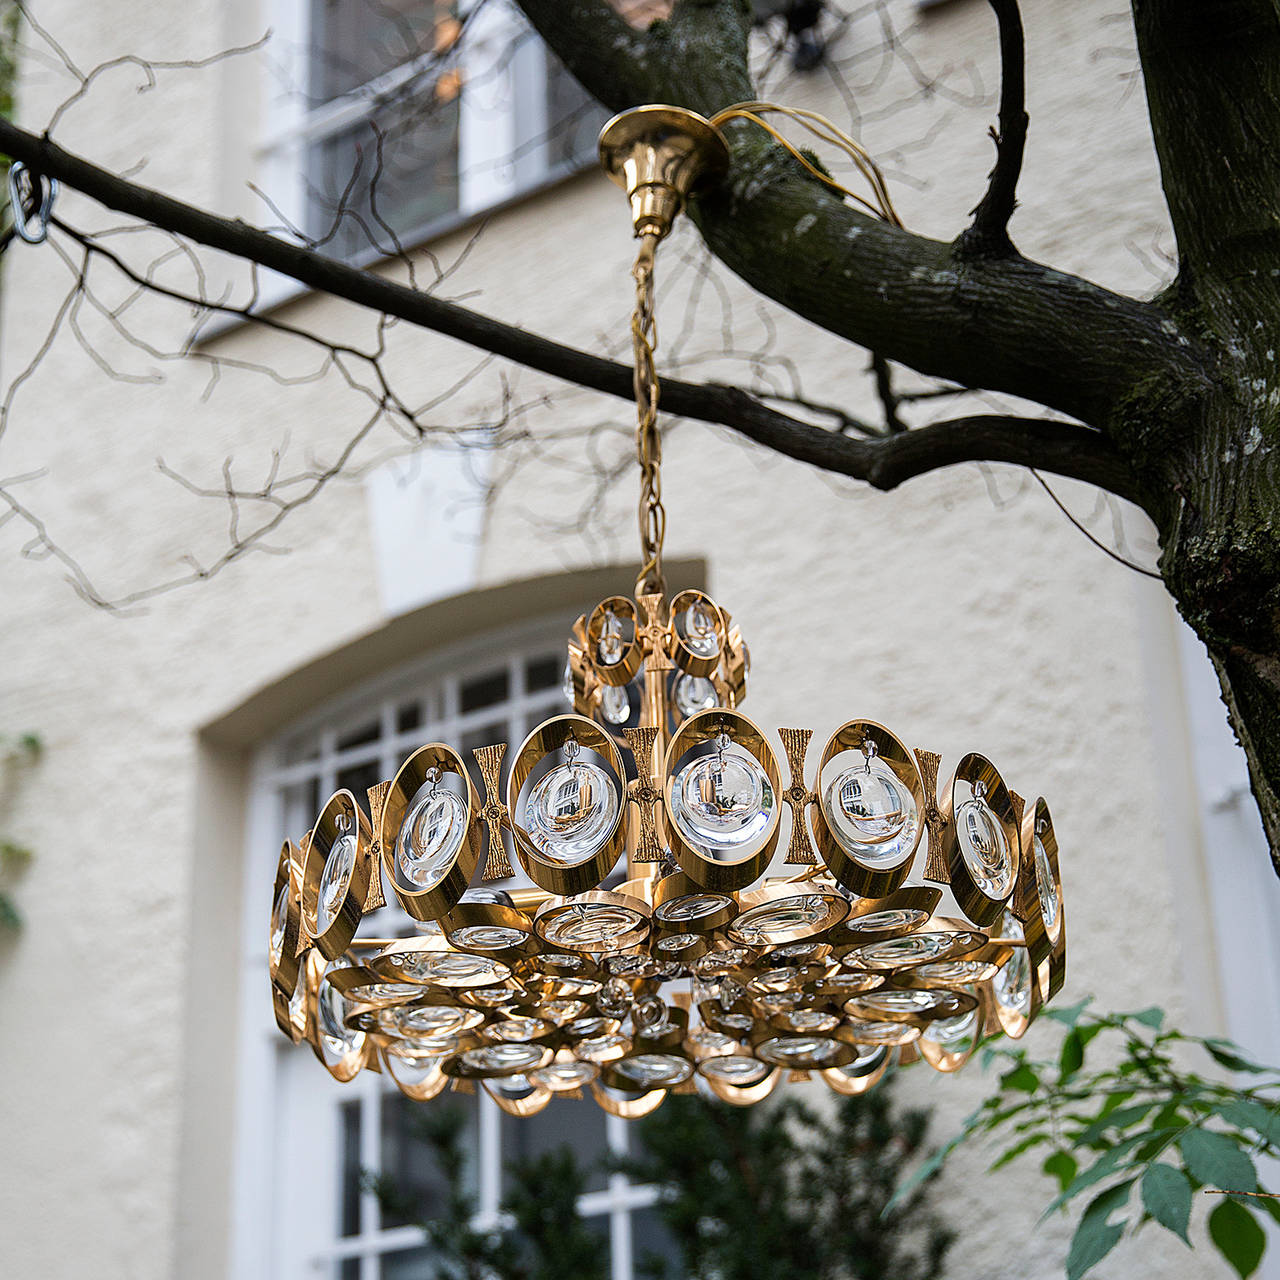 Elegant round chandelier made of textured gilt brass with concave and convex teardrop beveled crystal prisms within the outer rings of the chandelier structure. Five brass stick lights.